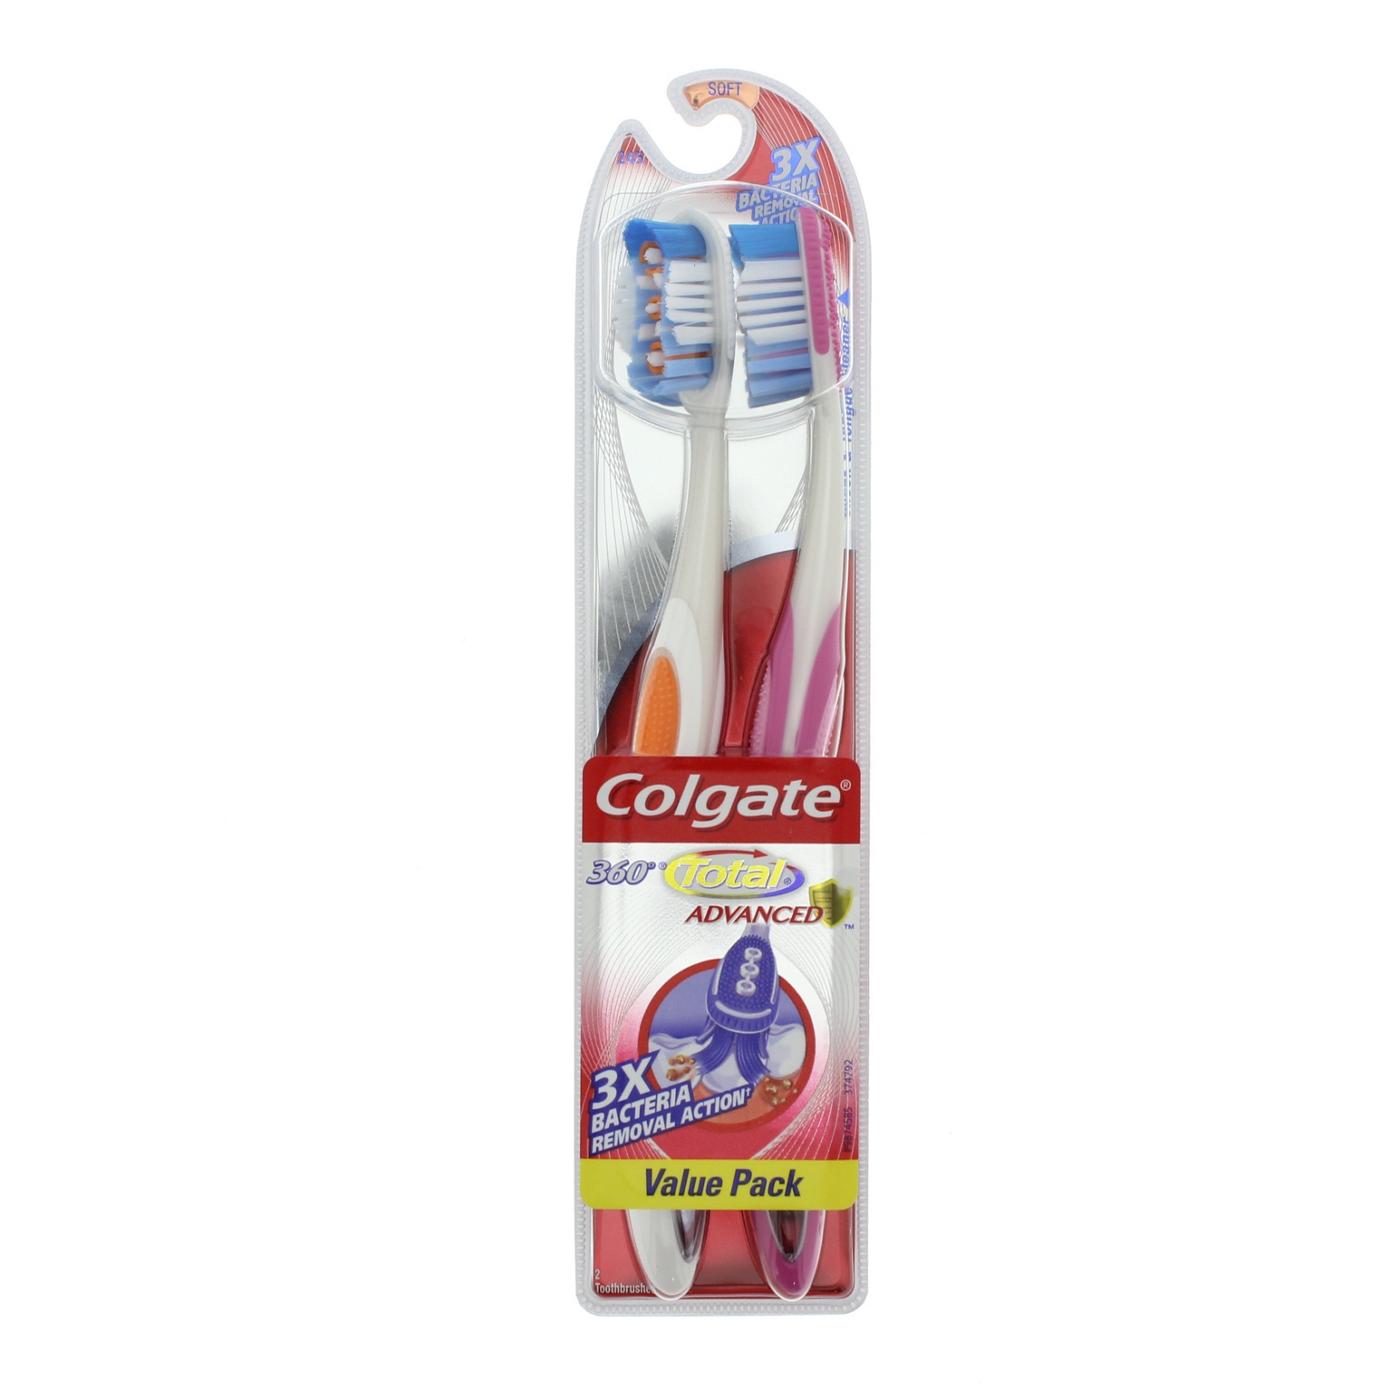 Colgate 360 Total Advanced Toothbrush, Soft - Colors May Vary; image 2 of 4